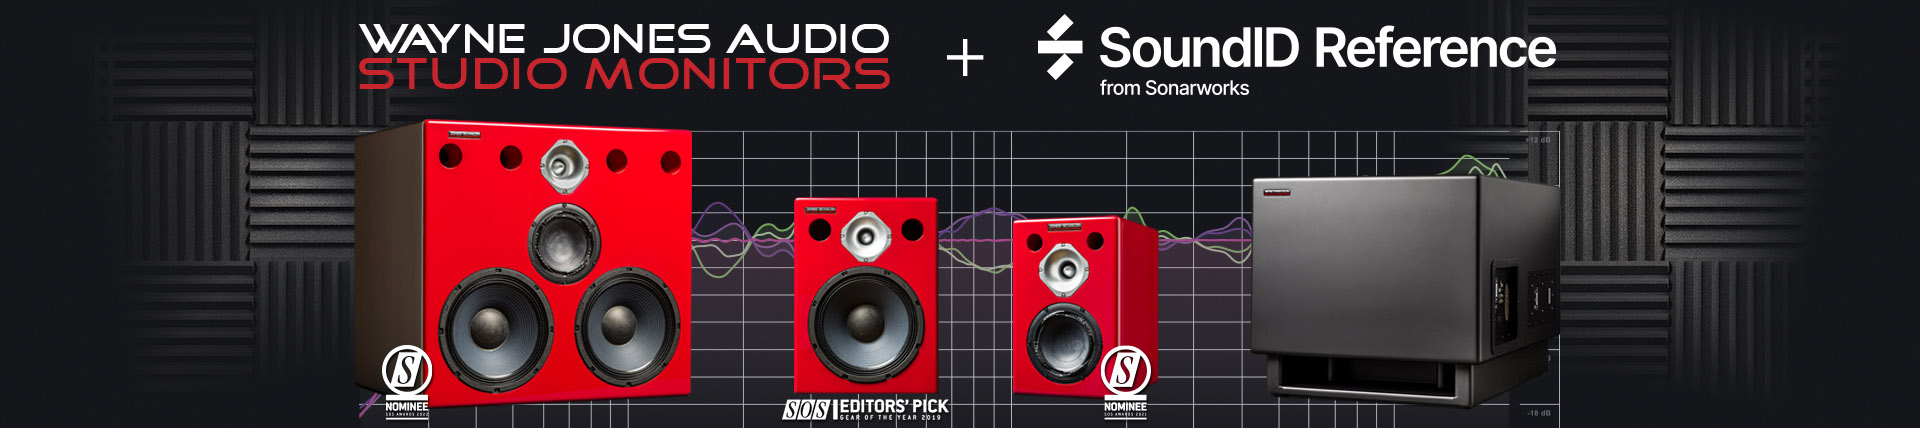 Wayne Jones Audio Studio Monitors proudly announcing a world first, with ground-breaking innovative technology achieved in partnership with Sonarworks. Upload and store room calibration profiles directly into the monitors up to 10,000 times.